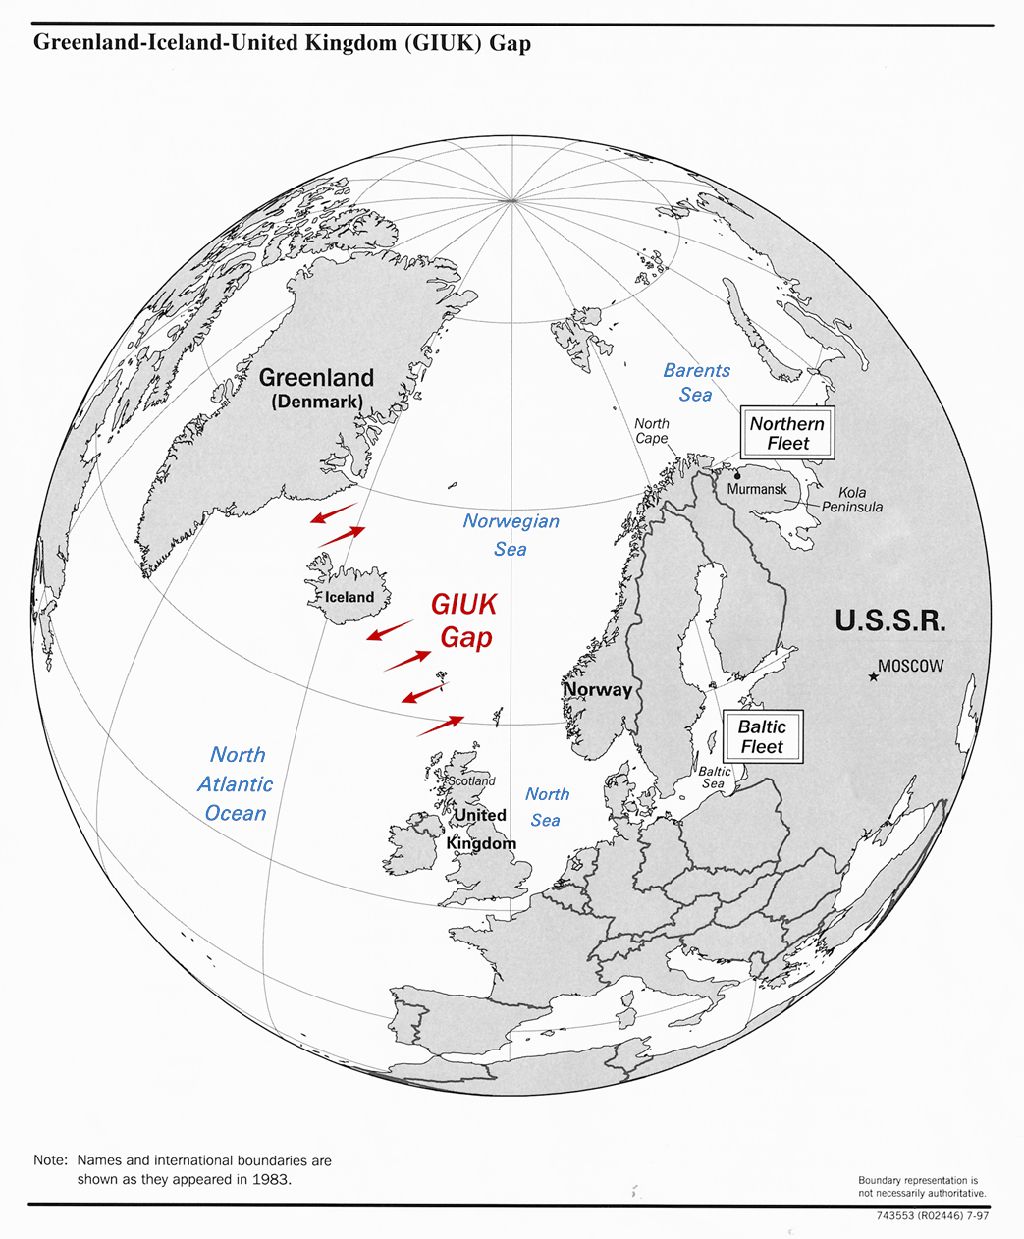 GIUK Gap - the route of Soviet submarines to the Atlantic